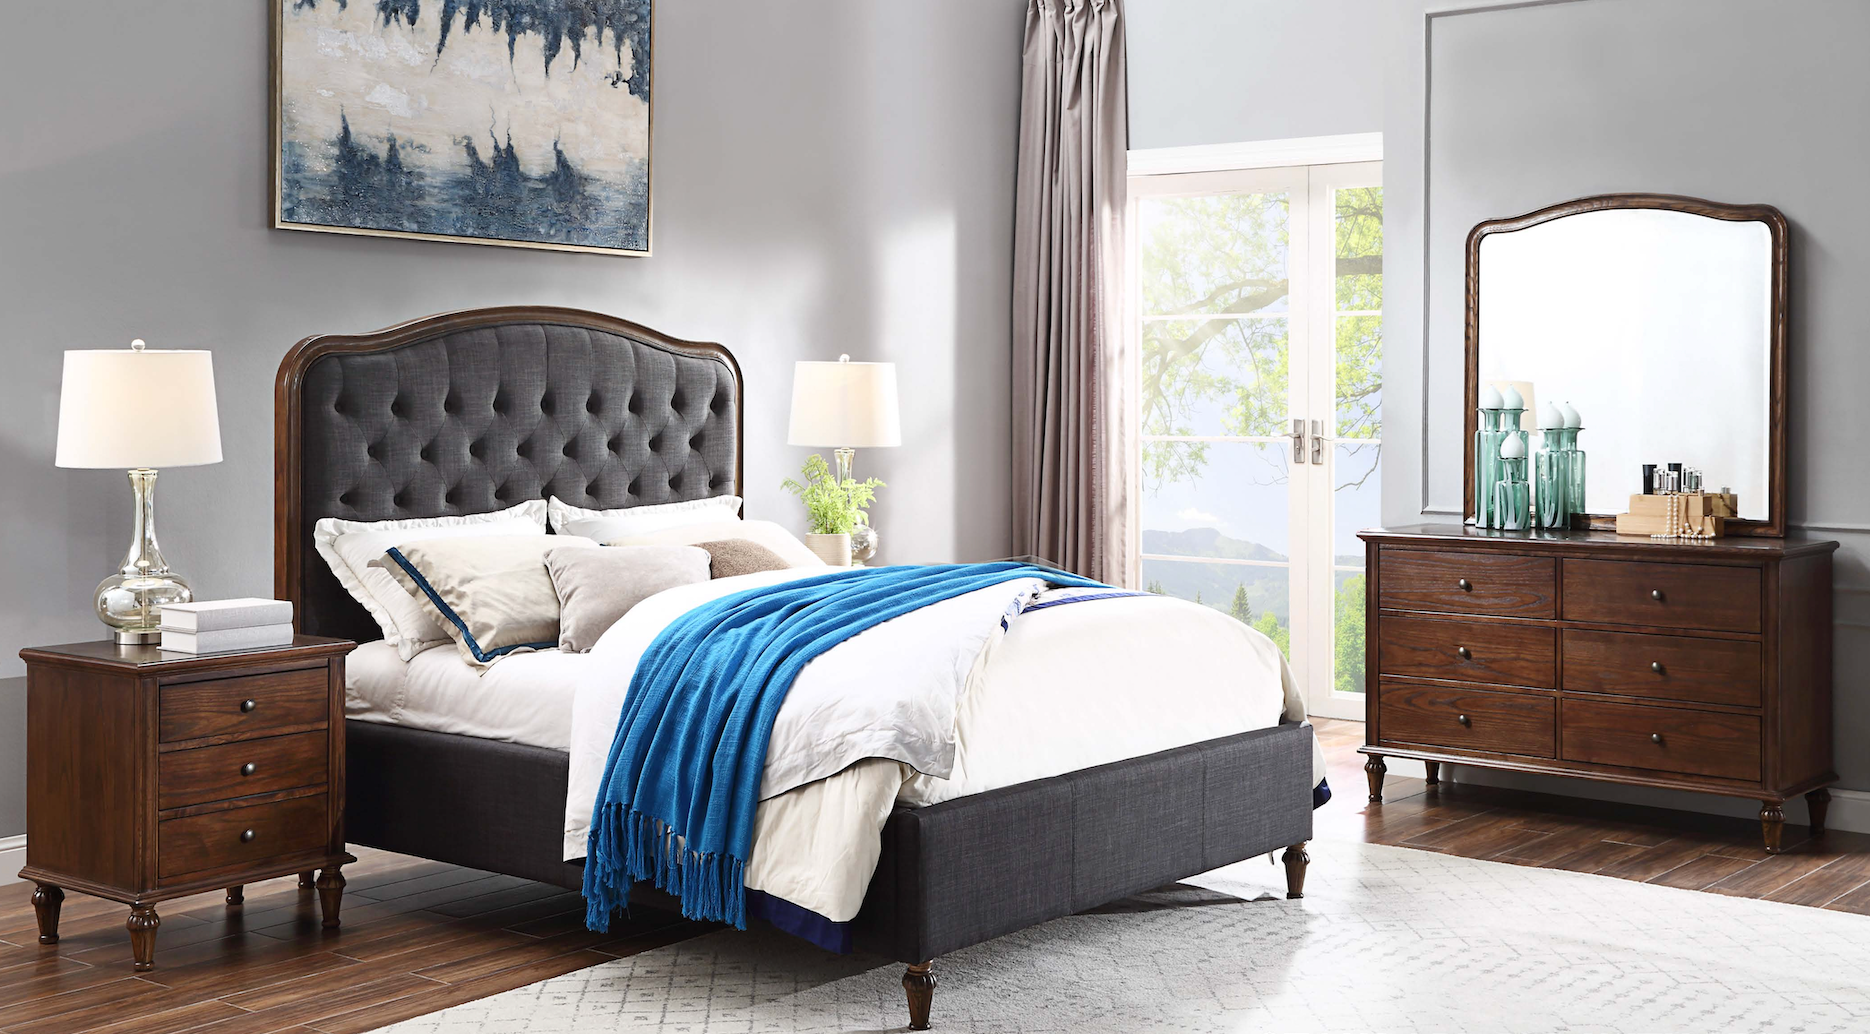 Magnolia Upholstered Bed with Storage Option